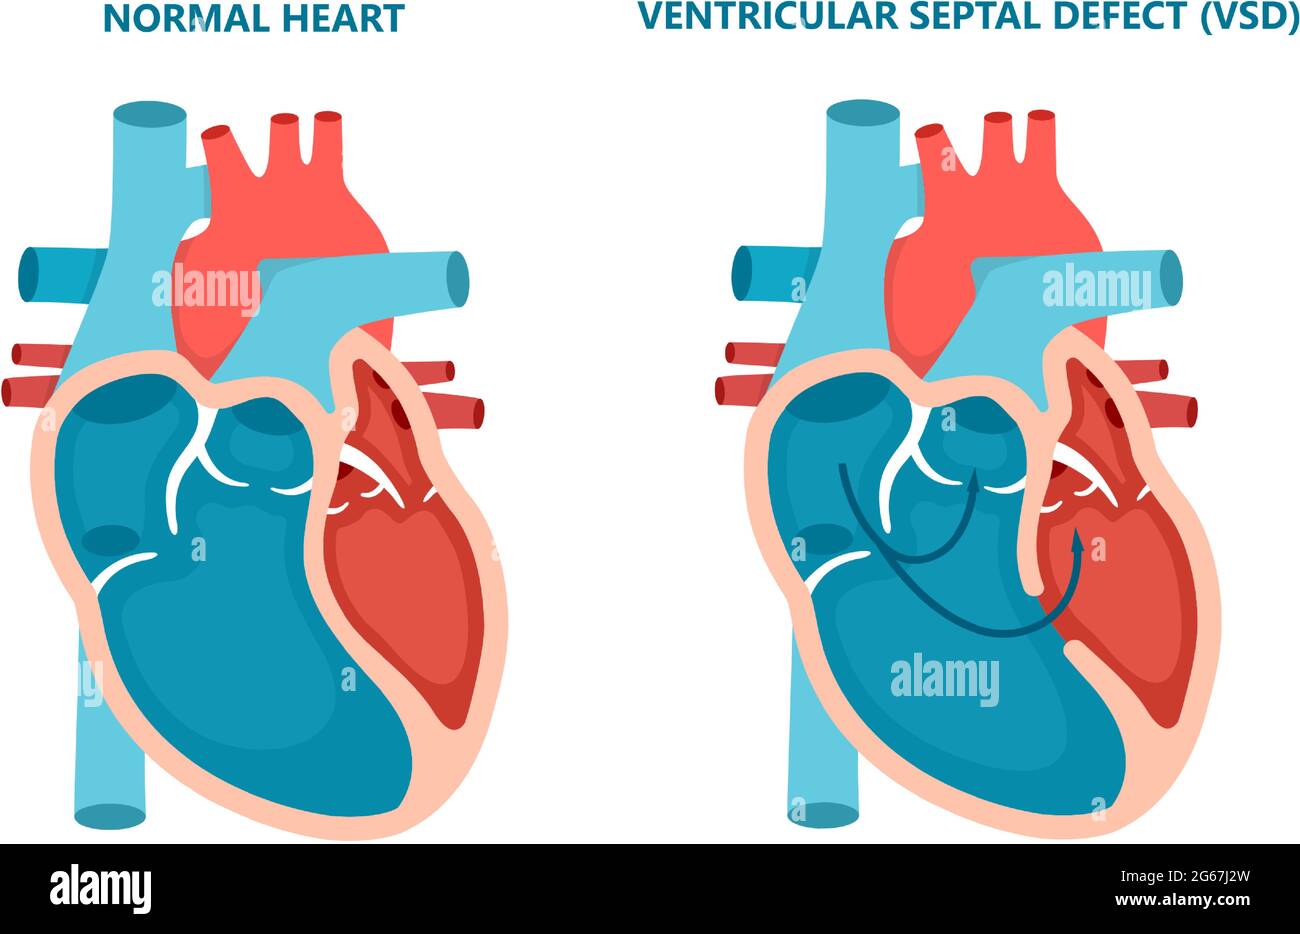 Ventricular septal defect VSD. Human heart muscle diseases cross-section. Cardiology concept. Stock Vector